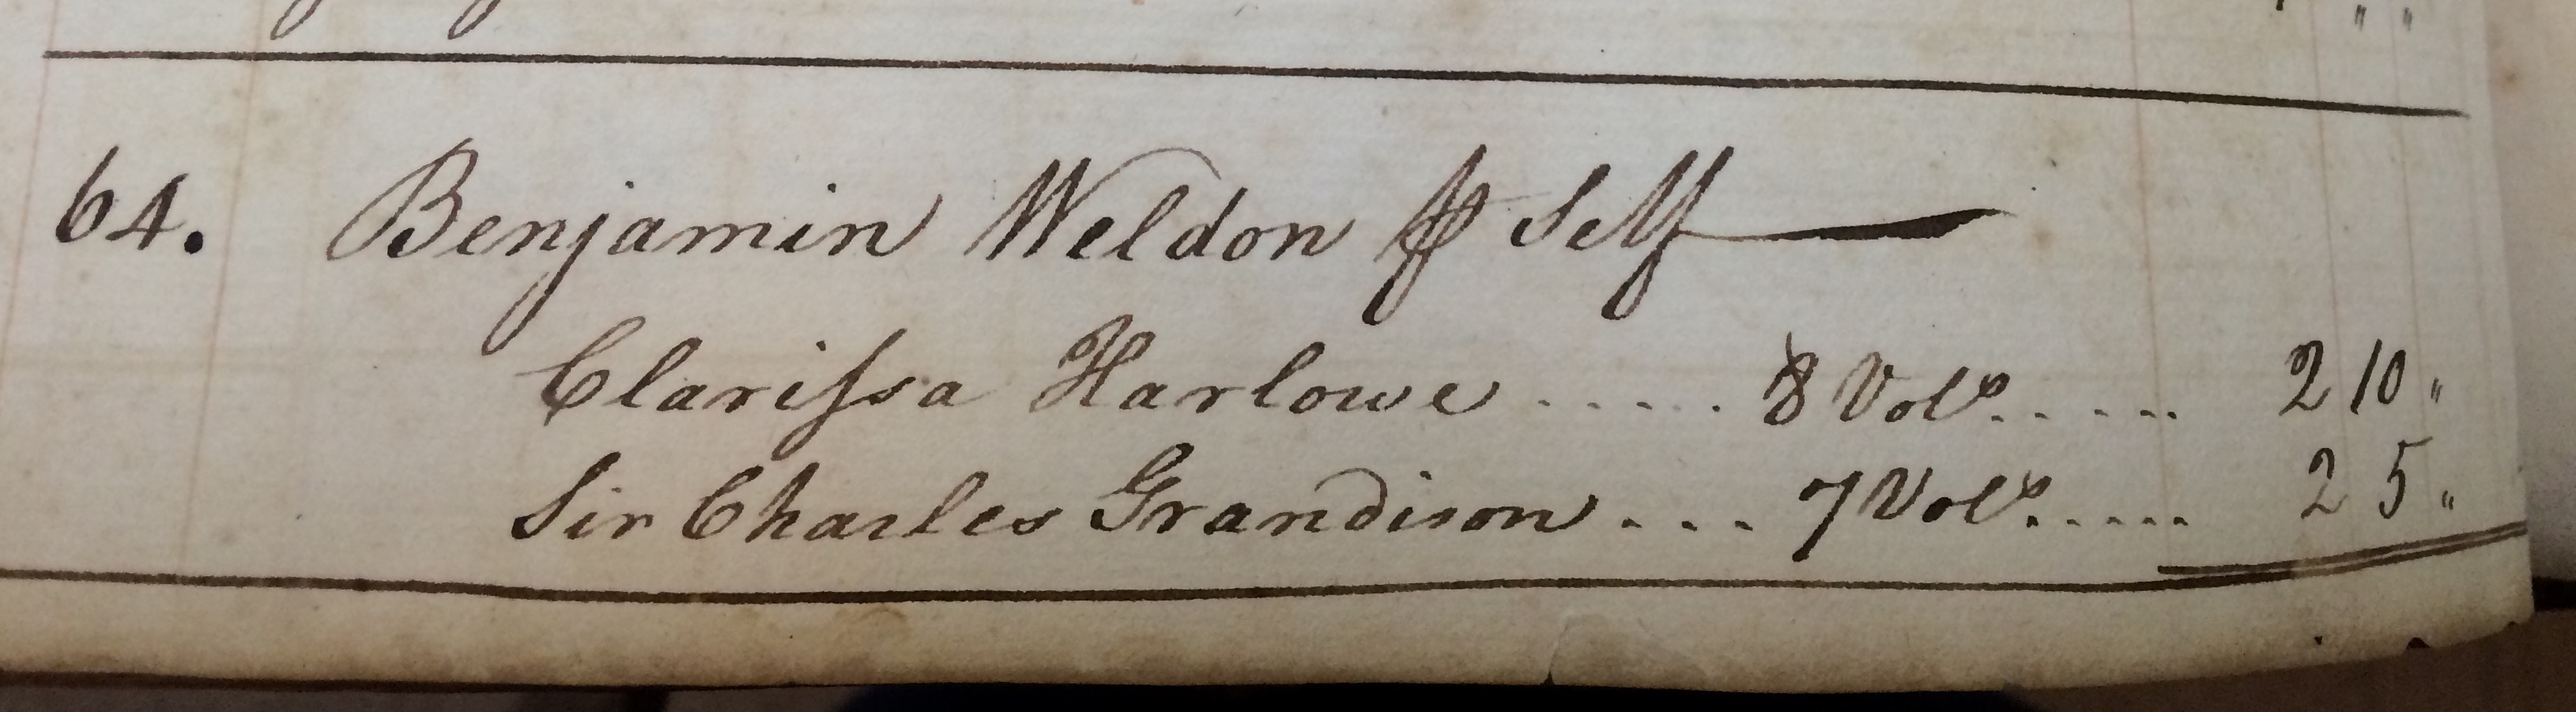 Alongside Shakespeare in the Virginia Gazette Daybook, I found a recorded purchase of two of Samuel Richardson's novels, "Clarissa: Or, the History of a Young Lady" (1747-8) and "The History of Sir Charles Grandison" (1753). 